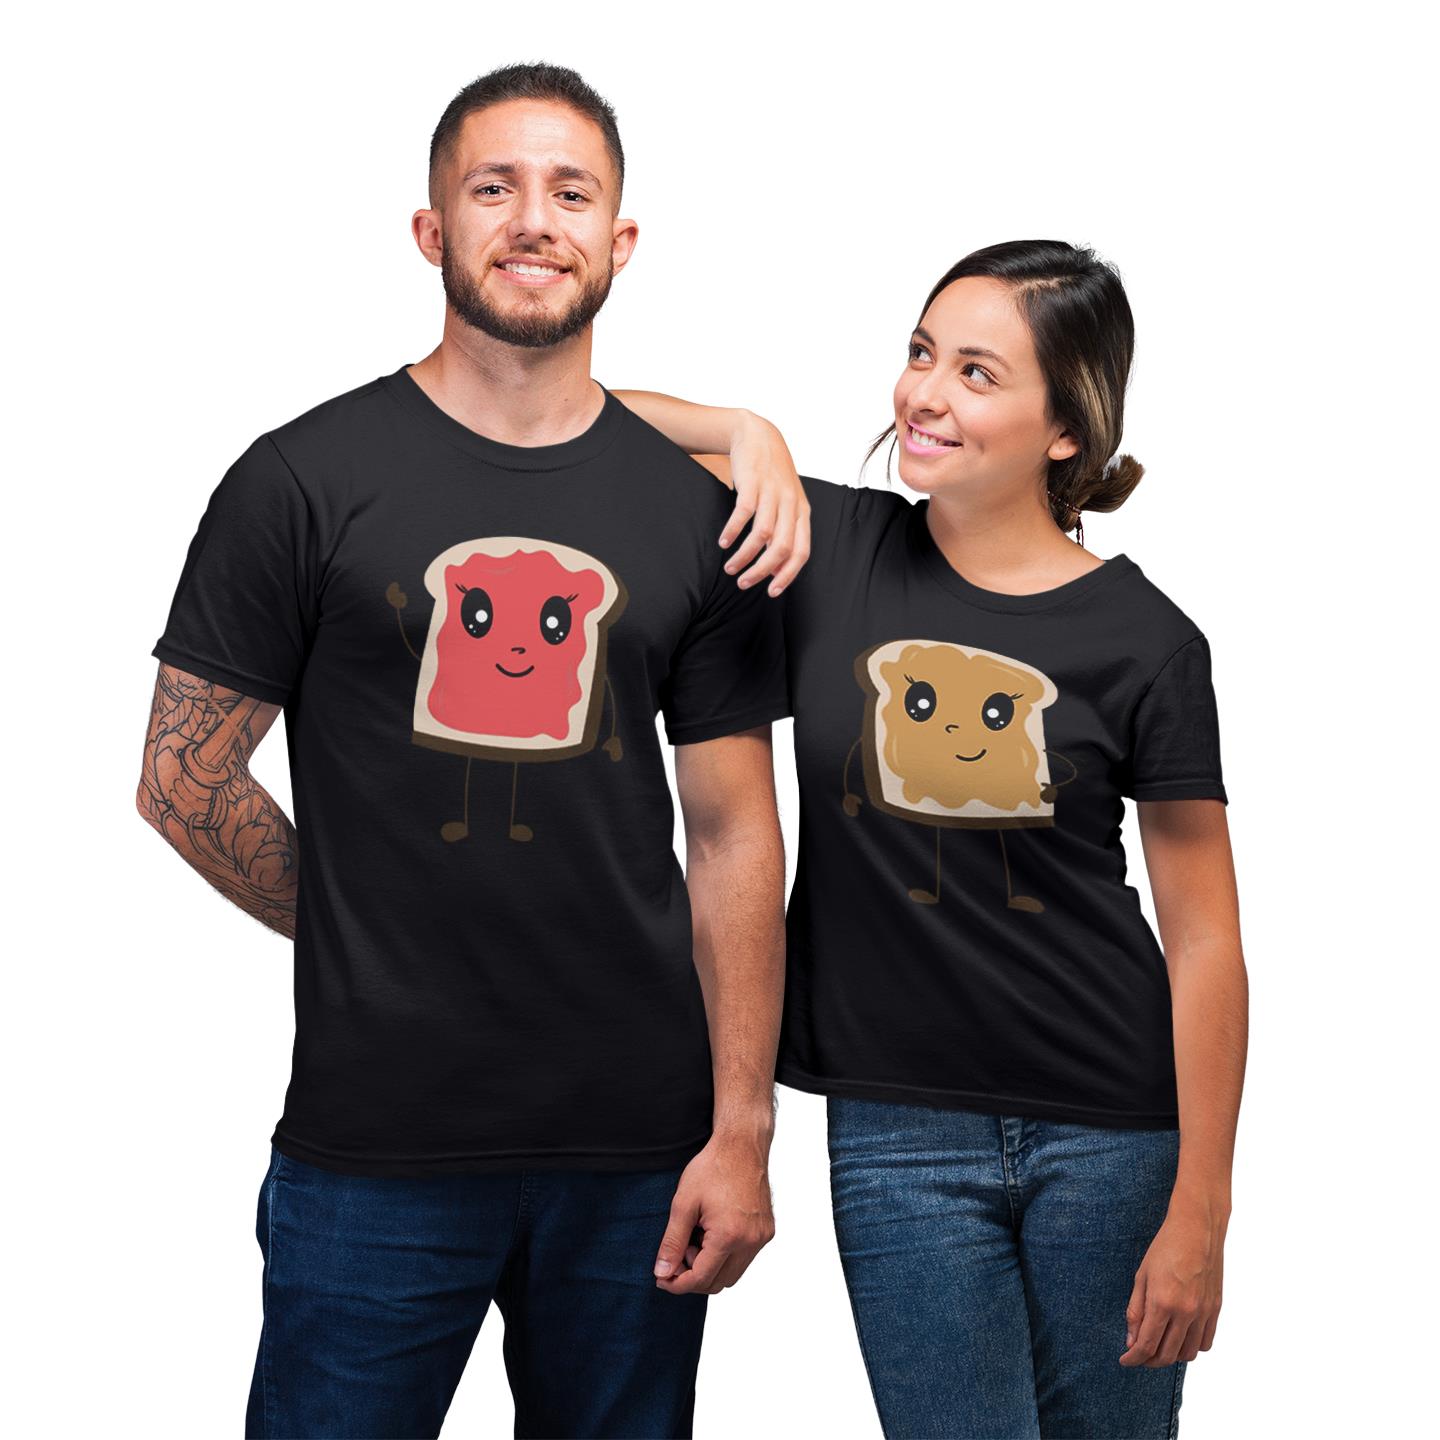 Peanut Butter and Jelly Matching Couples T-shirts